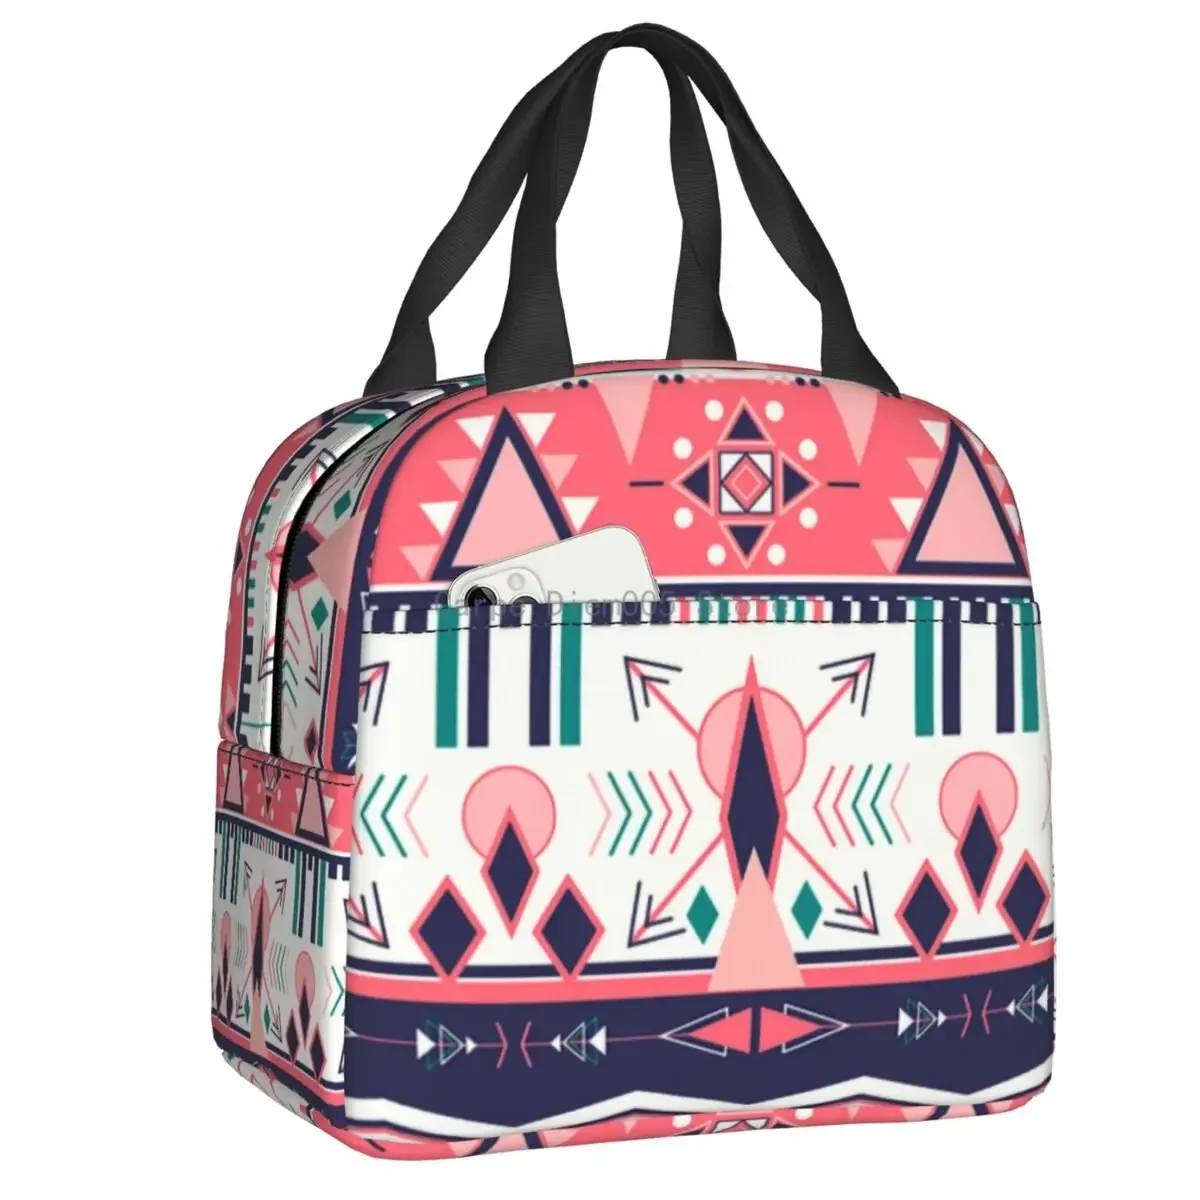 

Colorful Tribal Bohemian Pattern Insulated Lunch Tote Bag for Women Boho Stripe Portable Cooler Thermal Bento Box School Travel